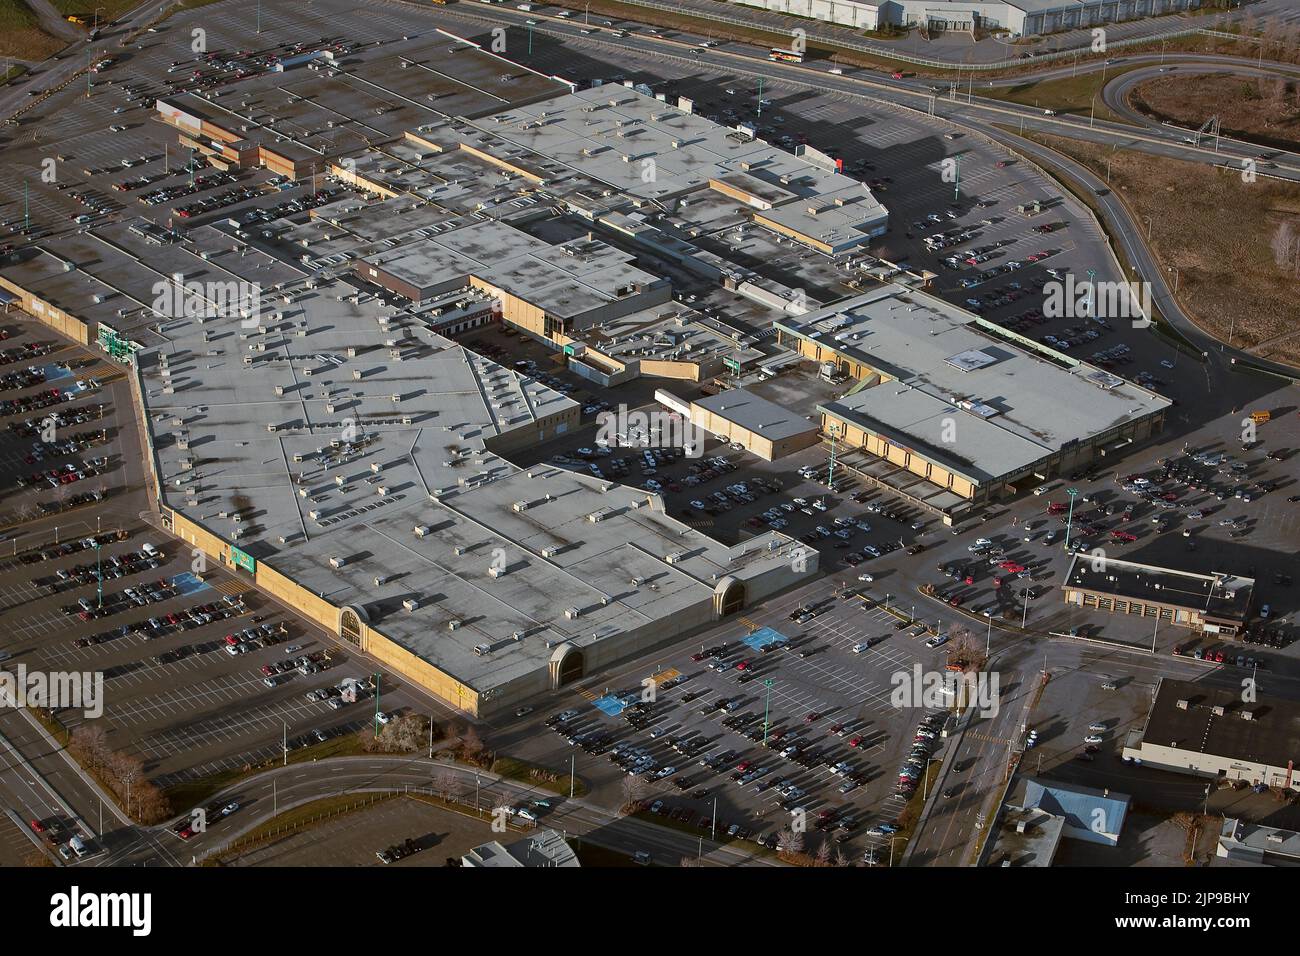 Place Fleur de Lys shopping Mall in Quebec city is pictured in this aerial photo November 11, 2009. Managed by Oxford Properties, Place Fleur de Lys is the third largest shopping mall in Quebec City and the largest among all malls in the city with one floor. Stock Photo